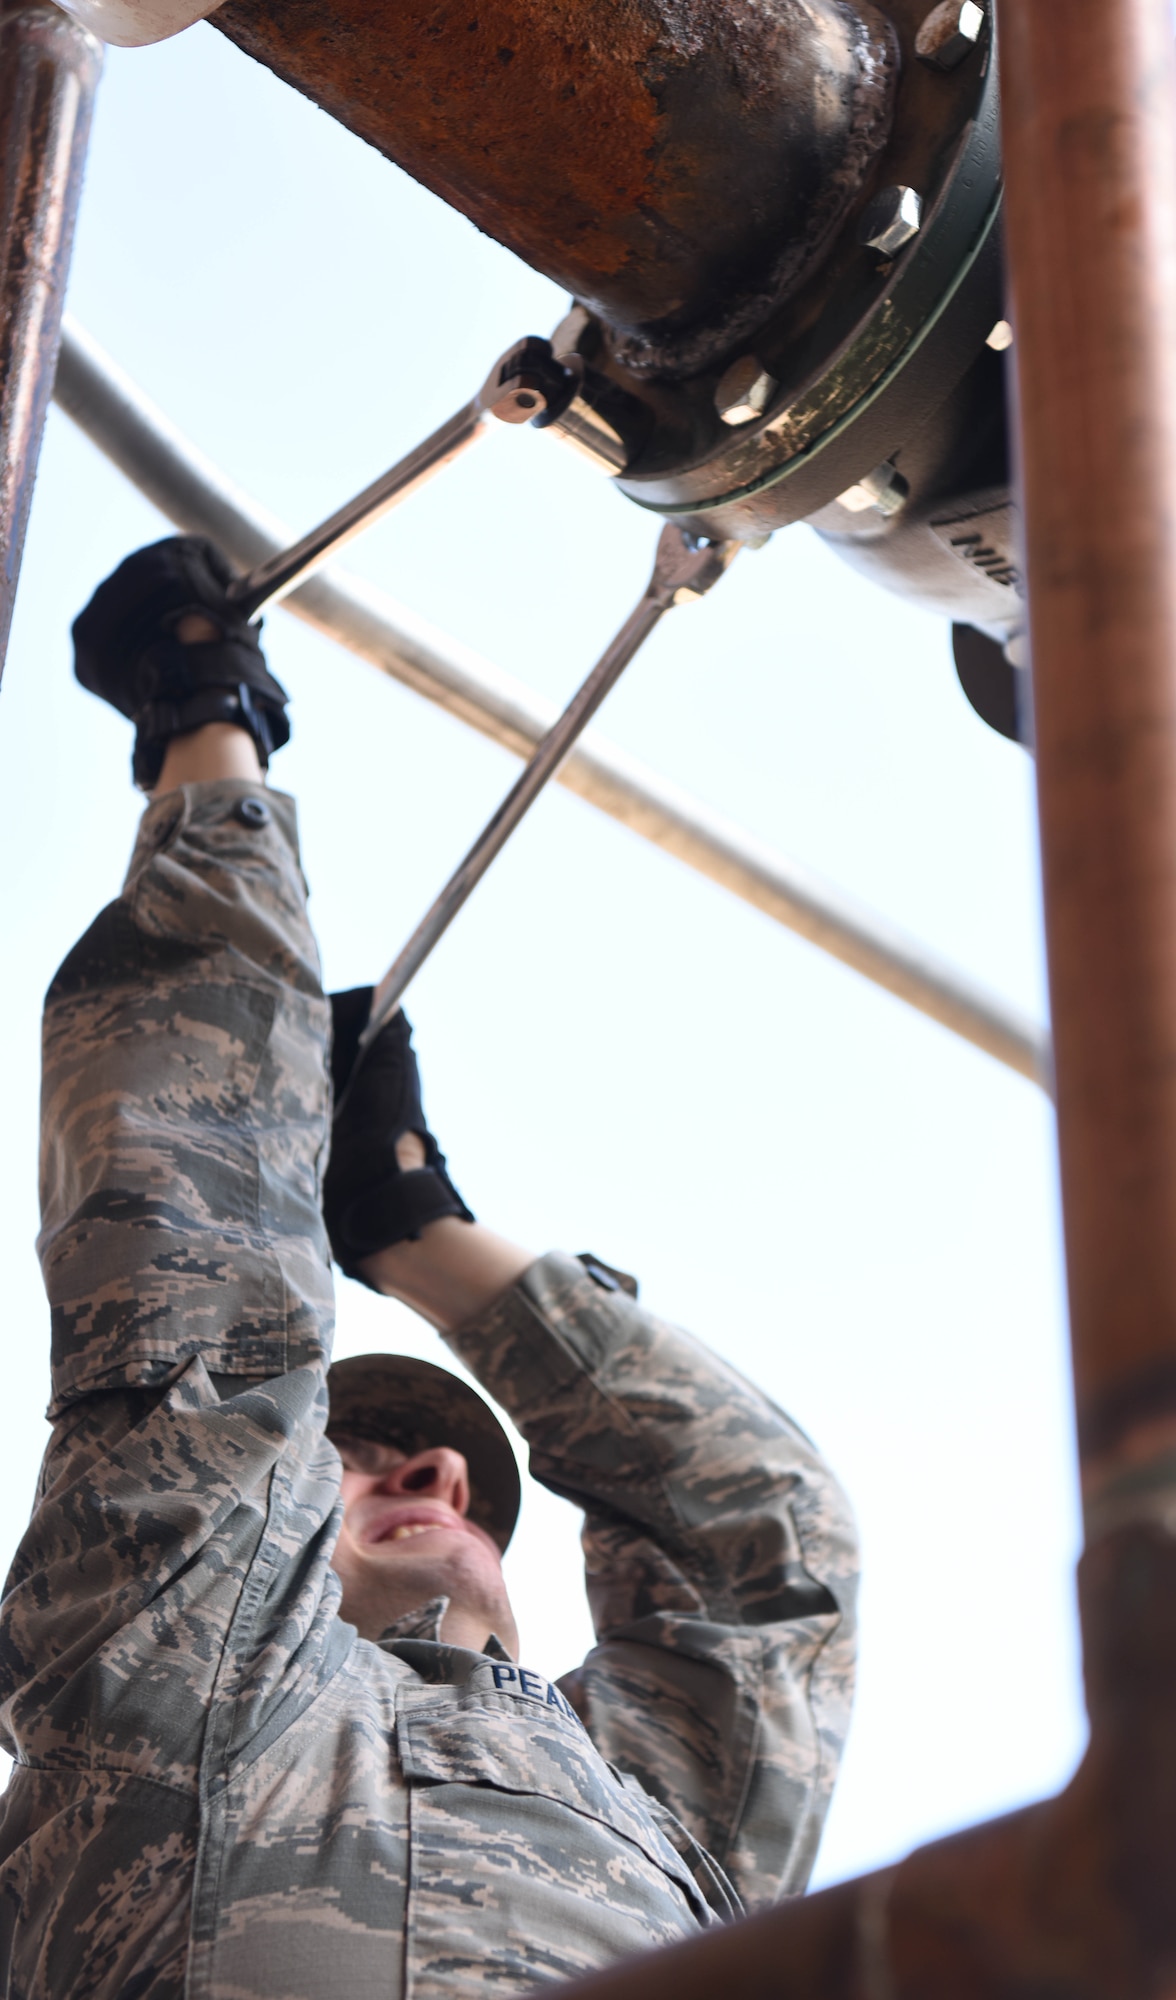 Airman 1st Class Christopher Pearce, a 28th Civil Engineer Squadron heating, ventilation and air conditioning apprentice, turns wrenches to loosen bolts on a pipe connected to an air conditioning unit at Ellsworth Air Force Base, S.D., May 3, 2018.  The 28th CES HVAC shop is responsible for installing and maintaining all of Ellsworth’s heating, cooling, ventilation and refrigeration equipment. (U.S. Air Force photo by Airman 1st Class Thomas Karol)